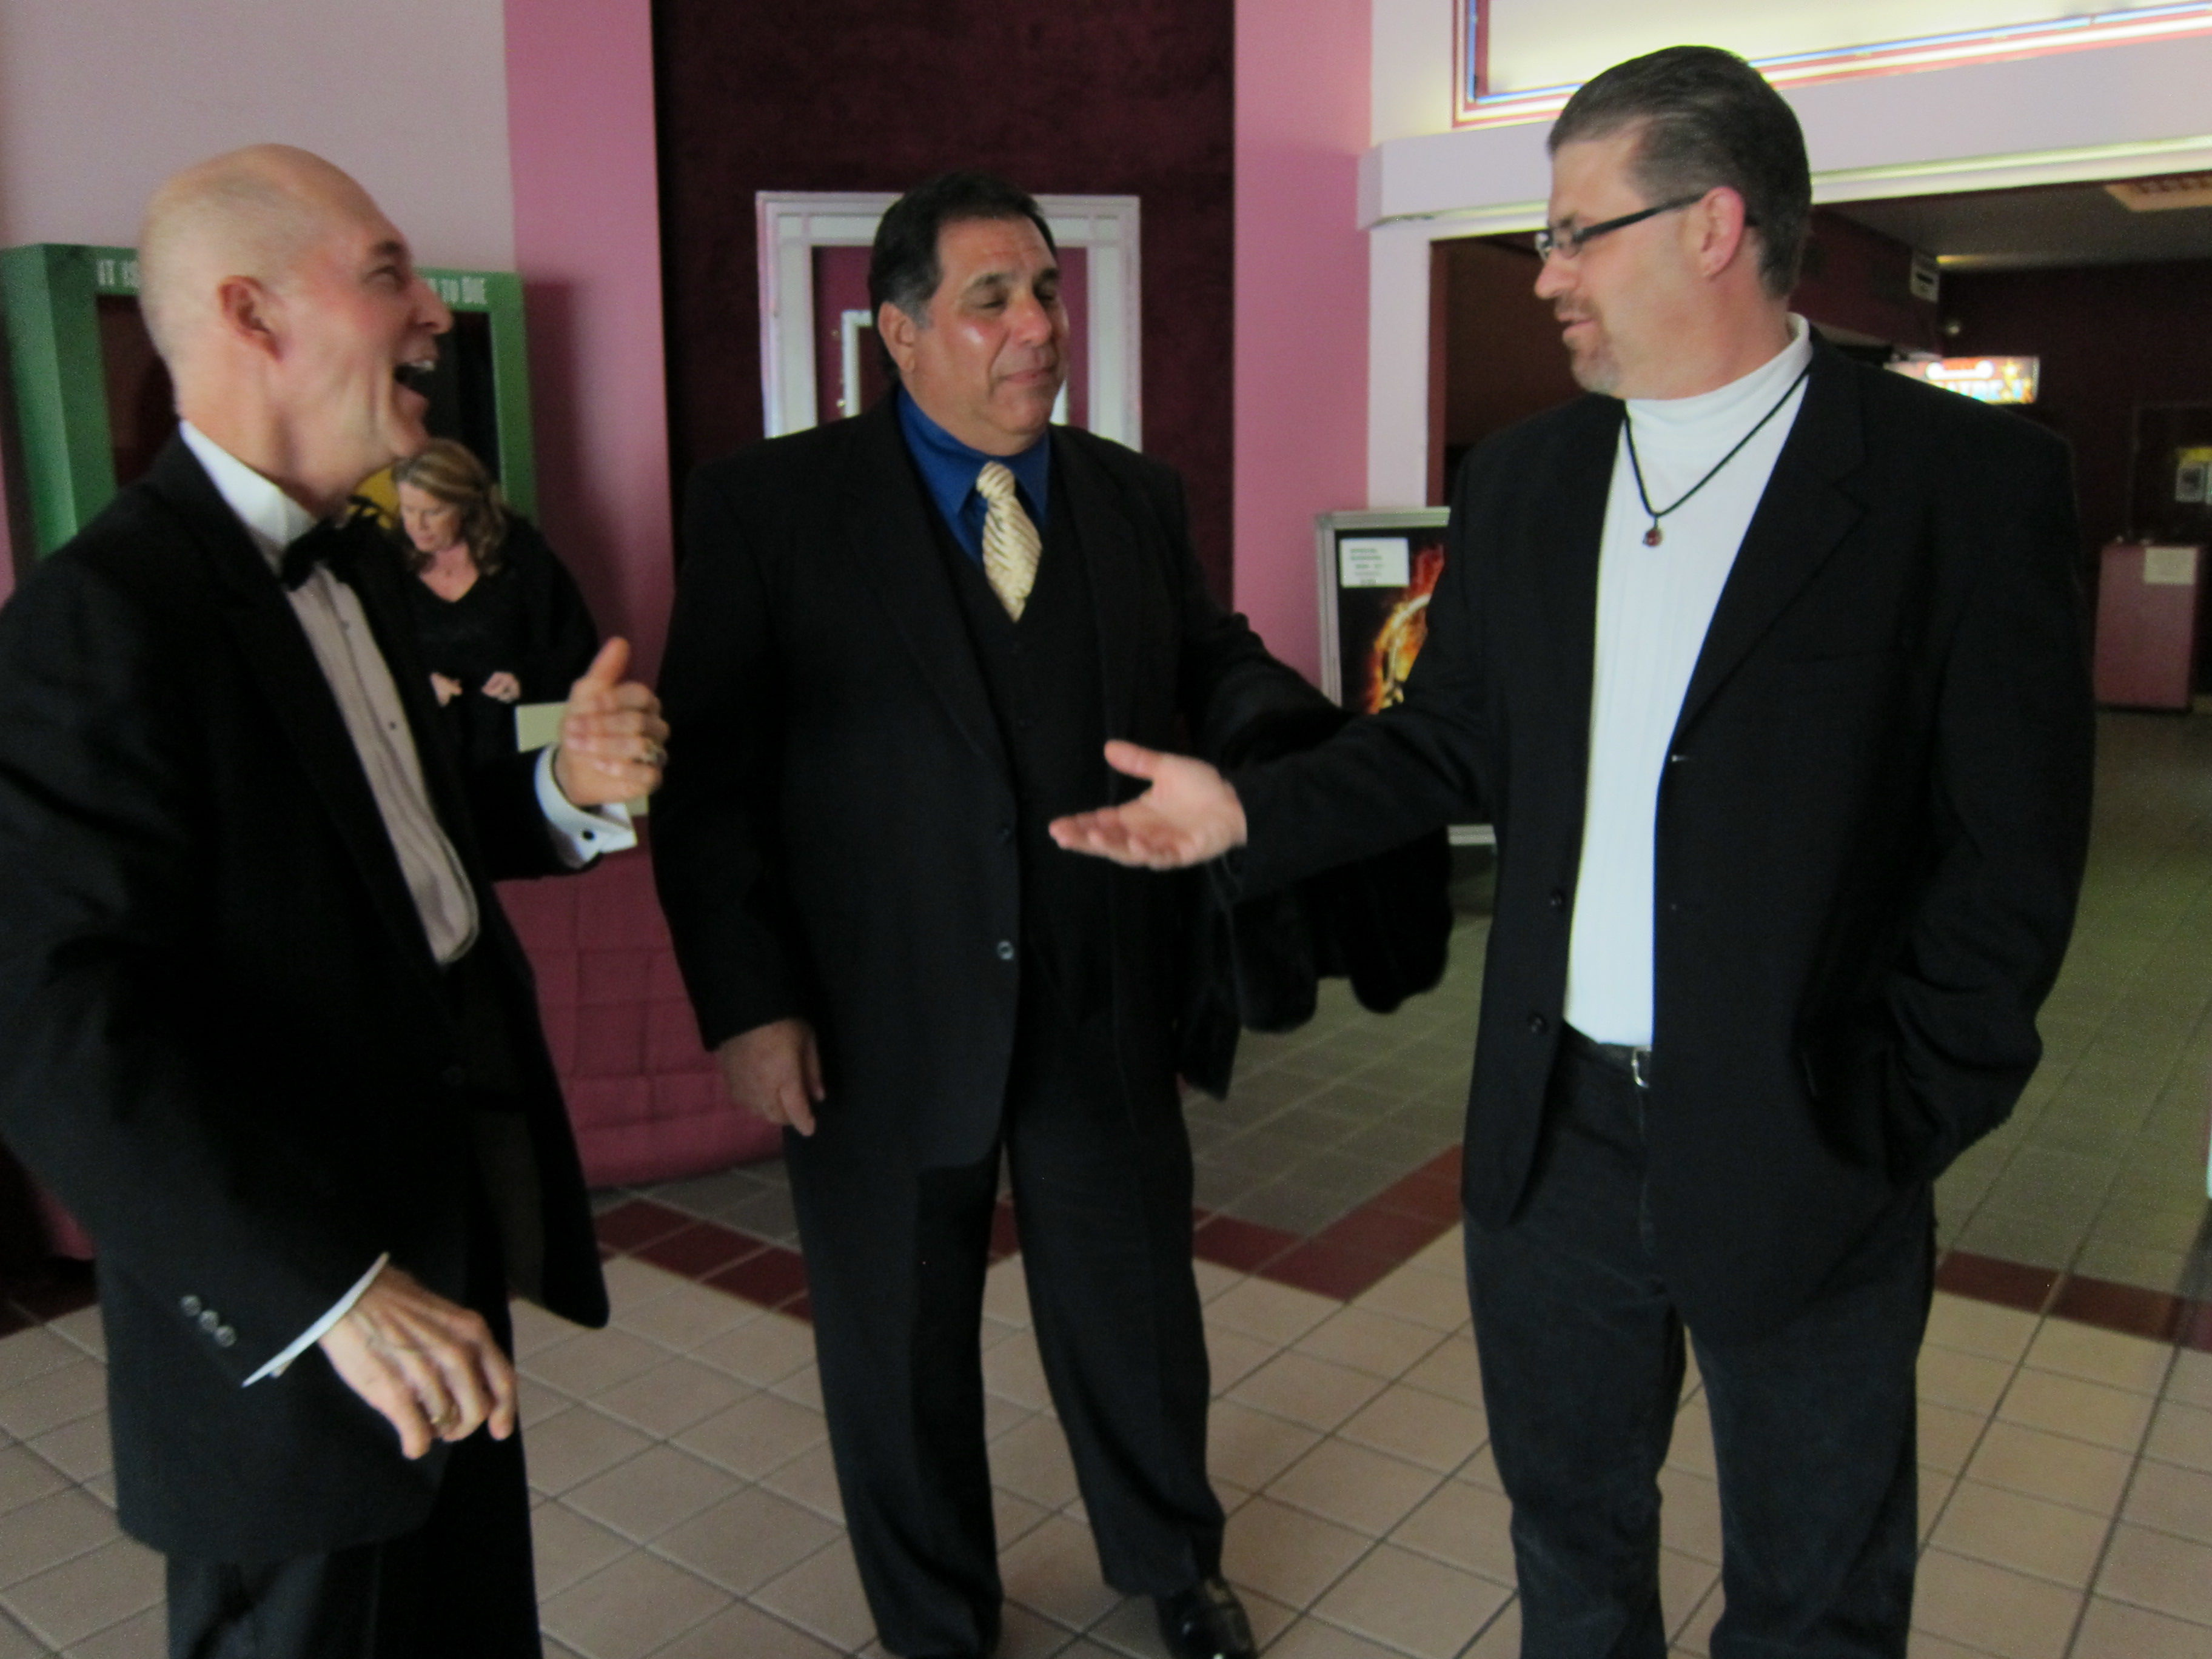 ICE Agent Premiere, Ray O'Neill, Ray Dippolito & Mike Trivisonno, 2013